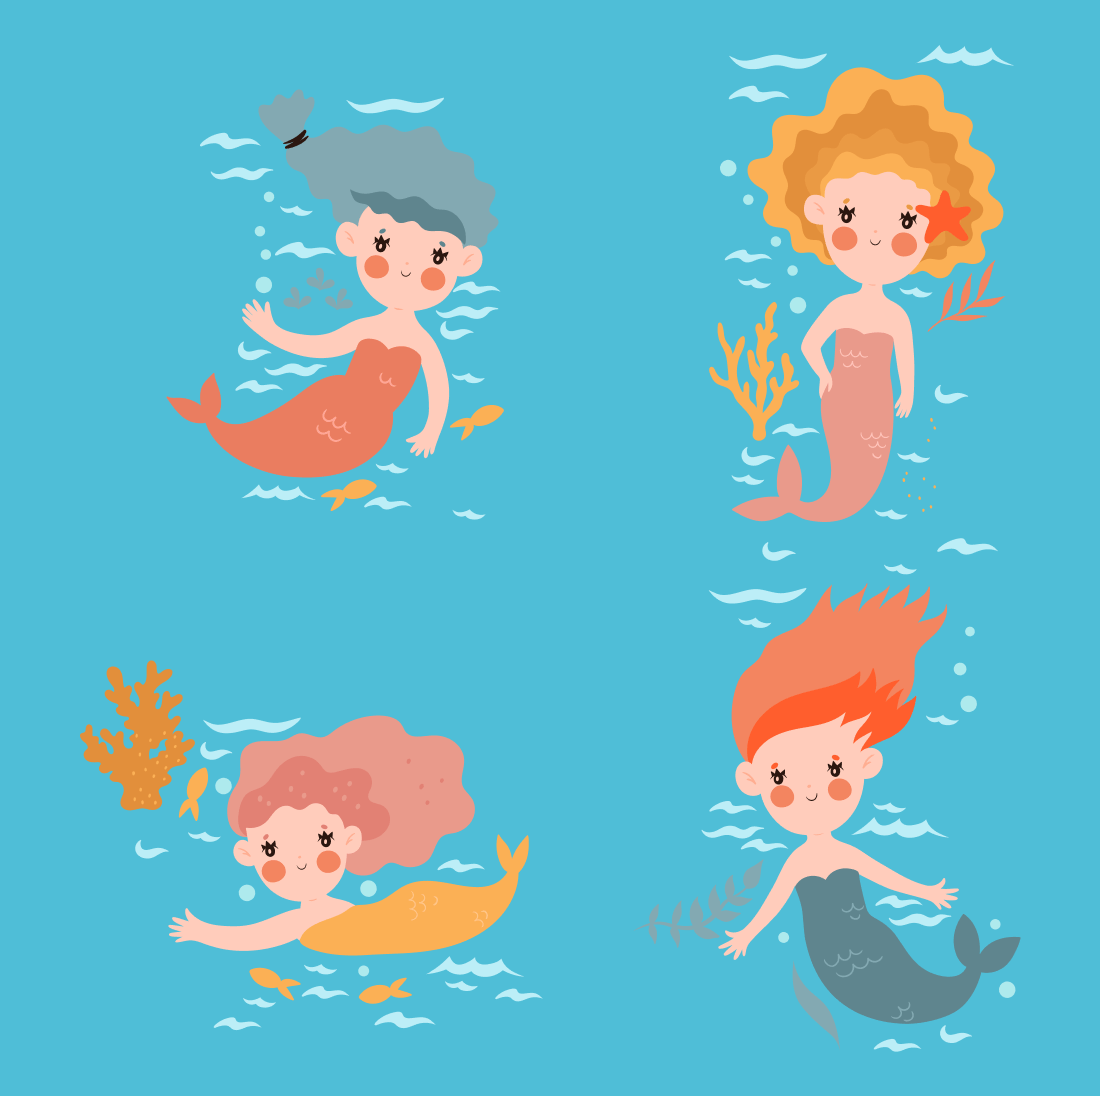 Cartoon mermaids with curly hair and beautiful hairstyles.